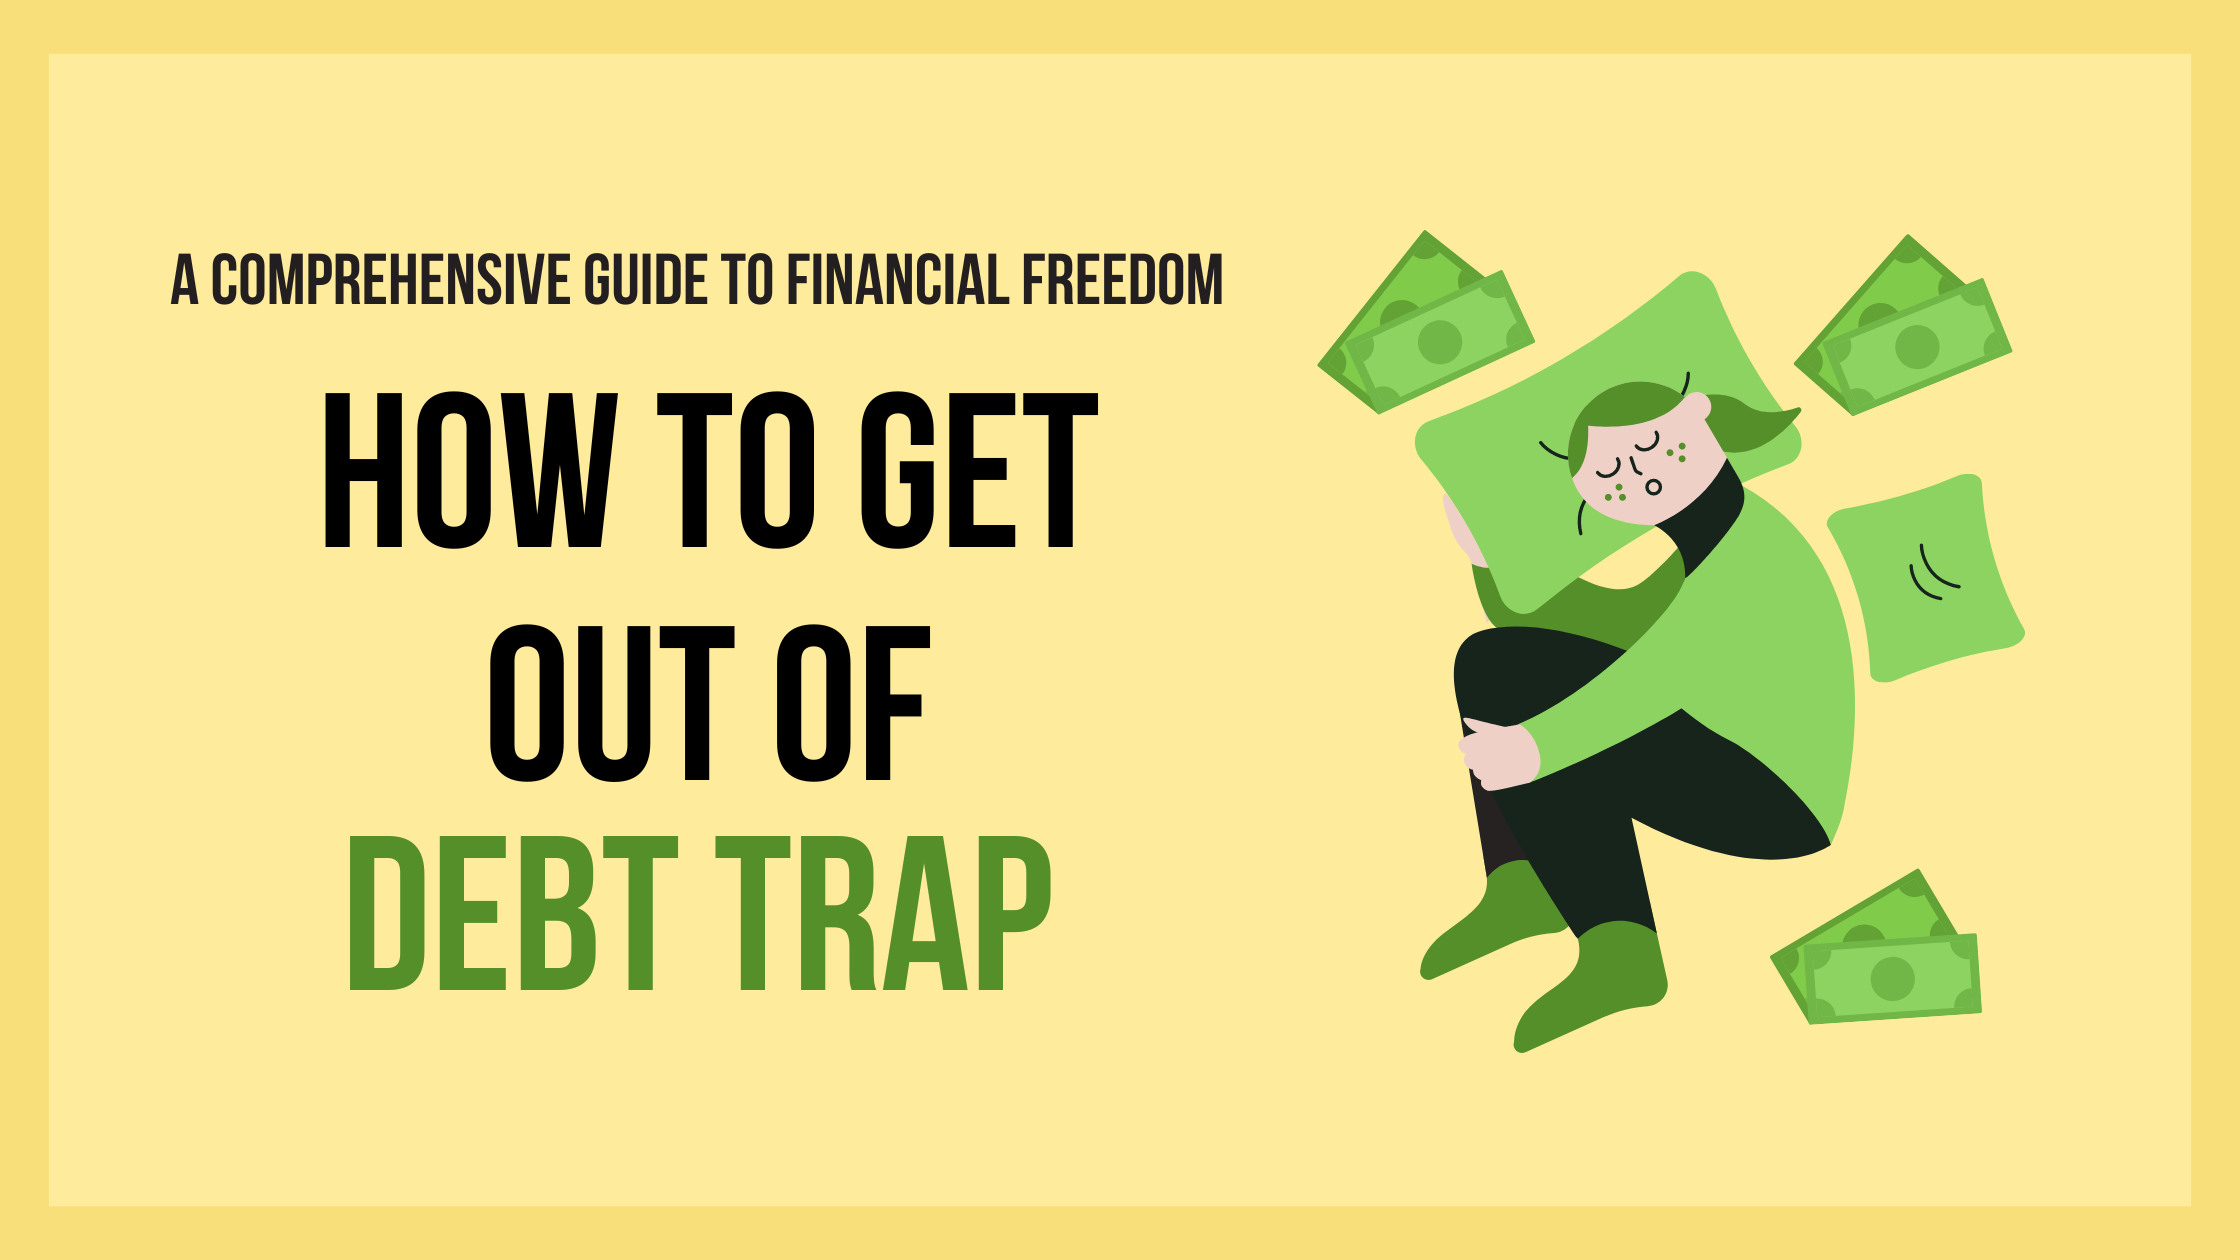 How To Get Out Of Debt Trap